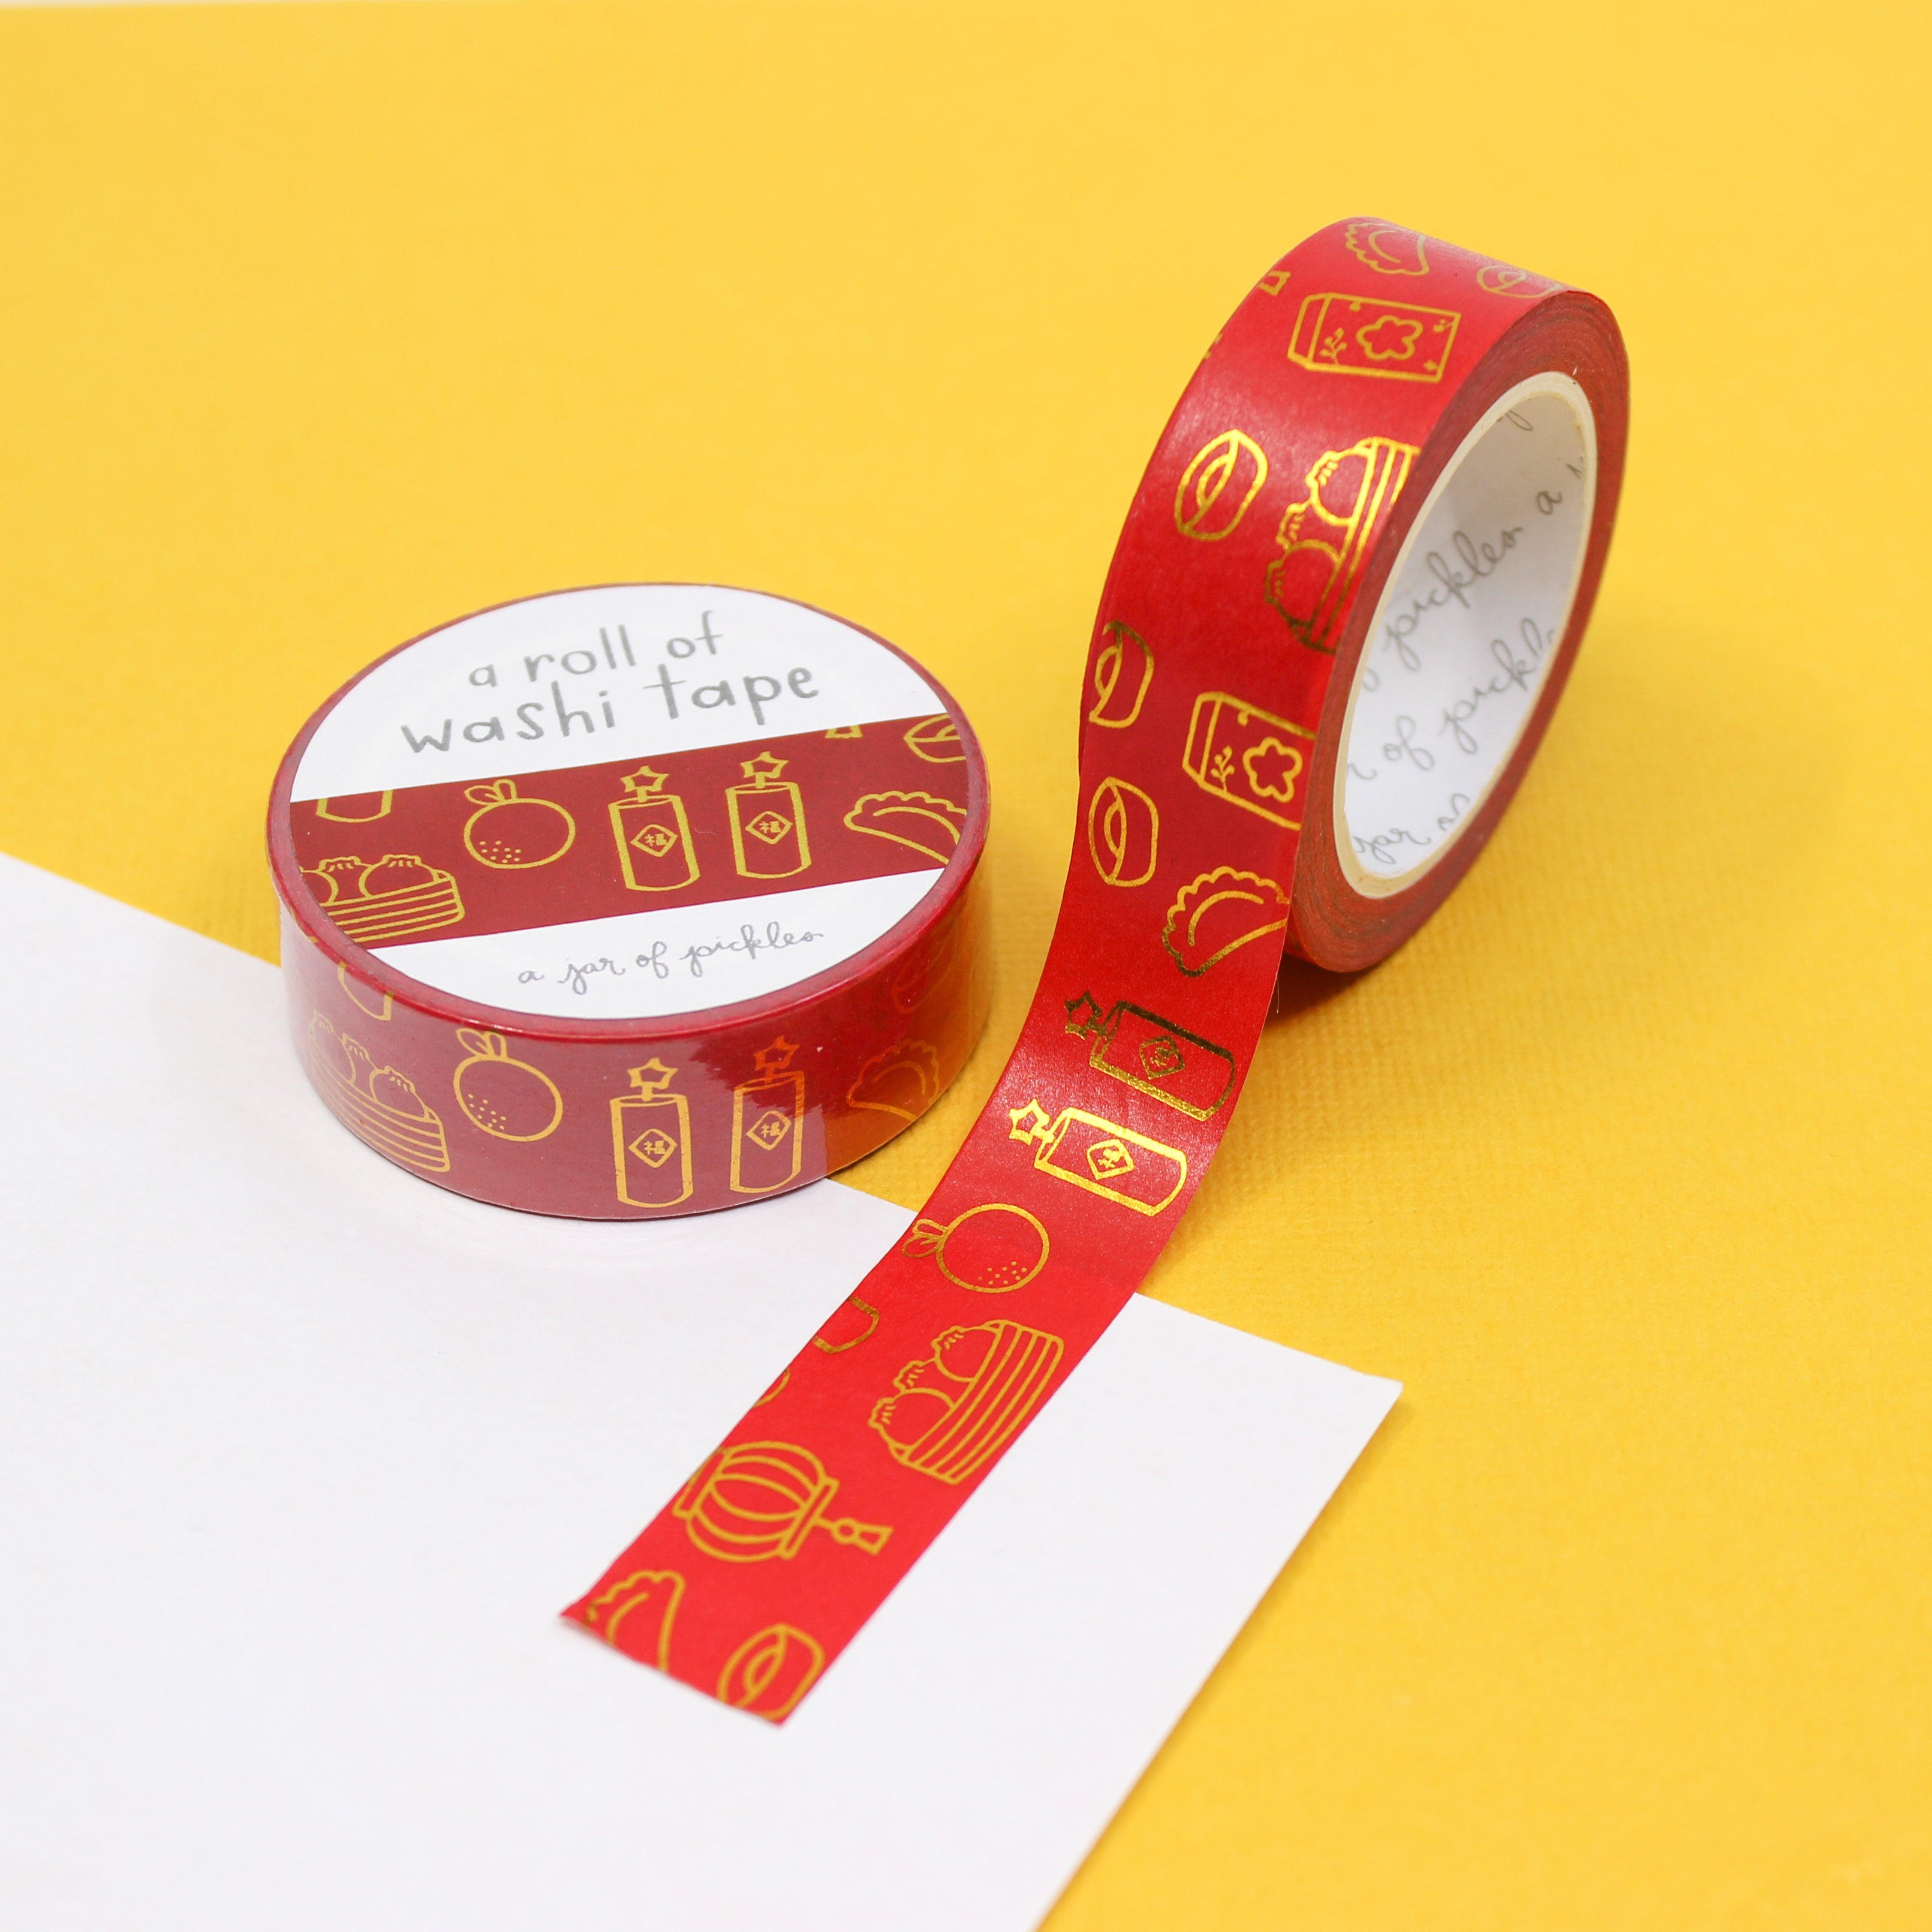 Lunar New Year Washi Tape features traditional motifs and symbols associated with the Lunar New Year, such as dragons, lanterns, fireworks, and the Chinese zodiac animals. It's perfect for adding a festive touch to your crafts, decorations, and gifts during the Lunar New Year celebrations. This tape is from A Jar of Pickles and sold at BBB Supplies Craft Shop.